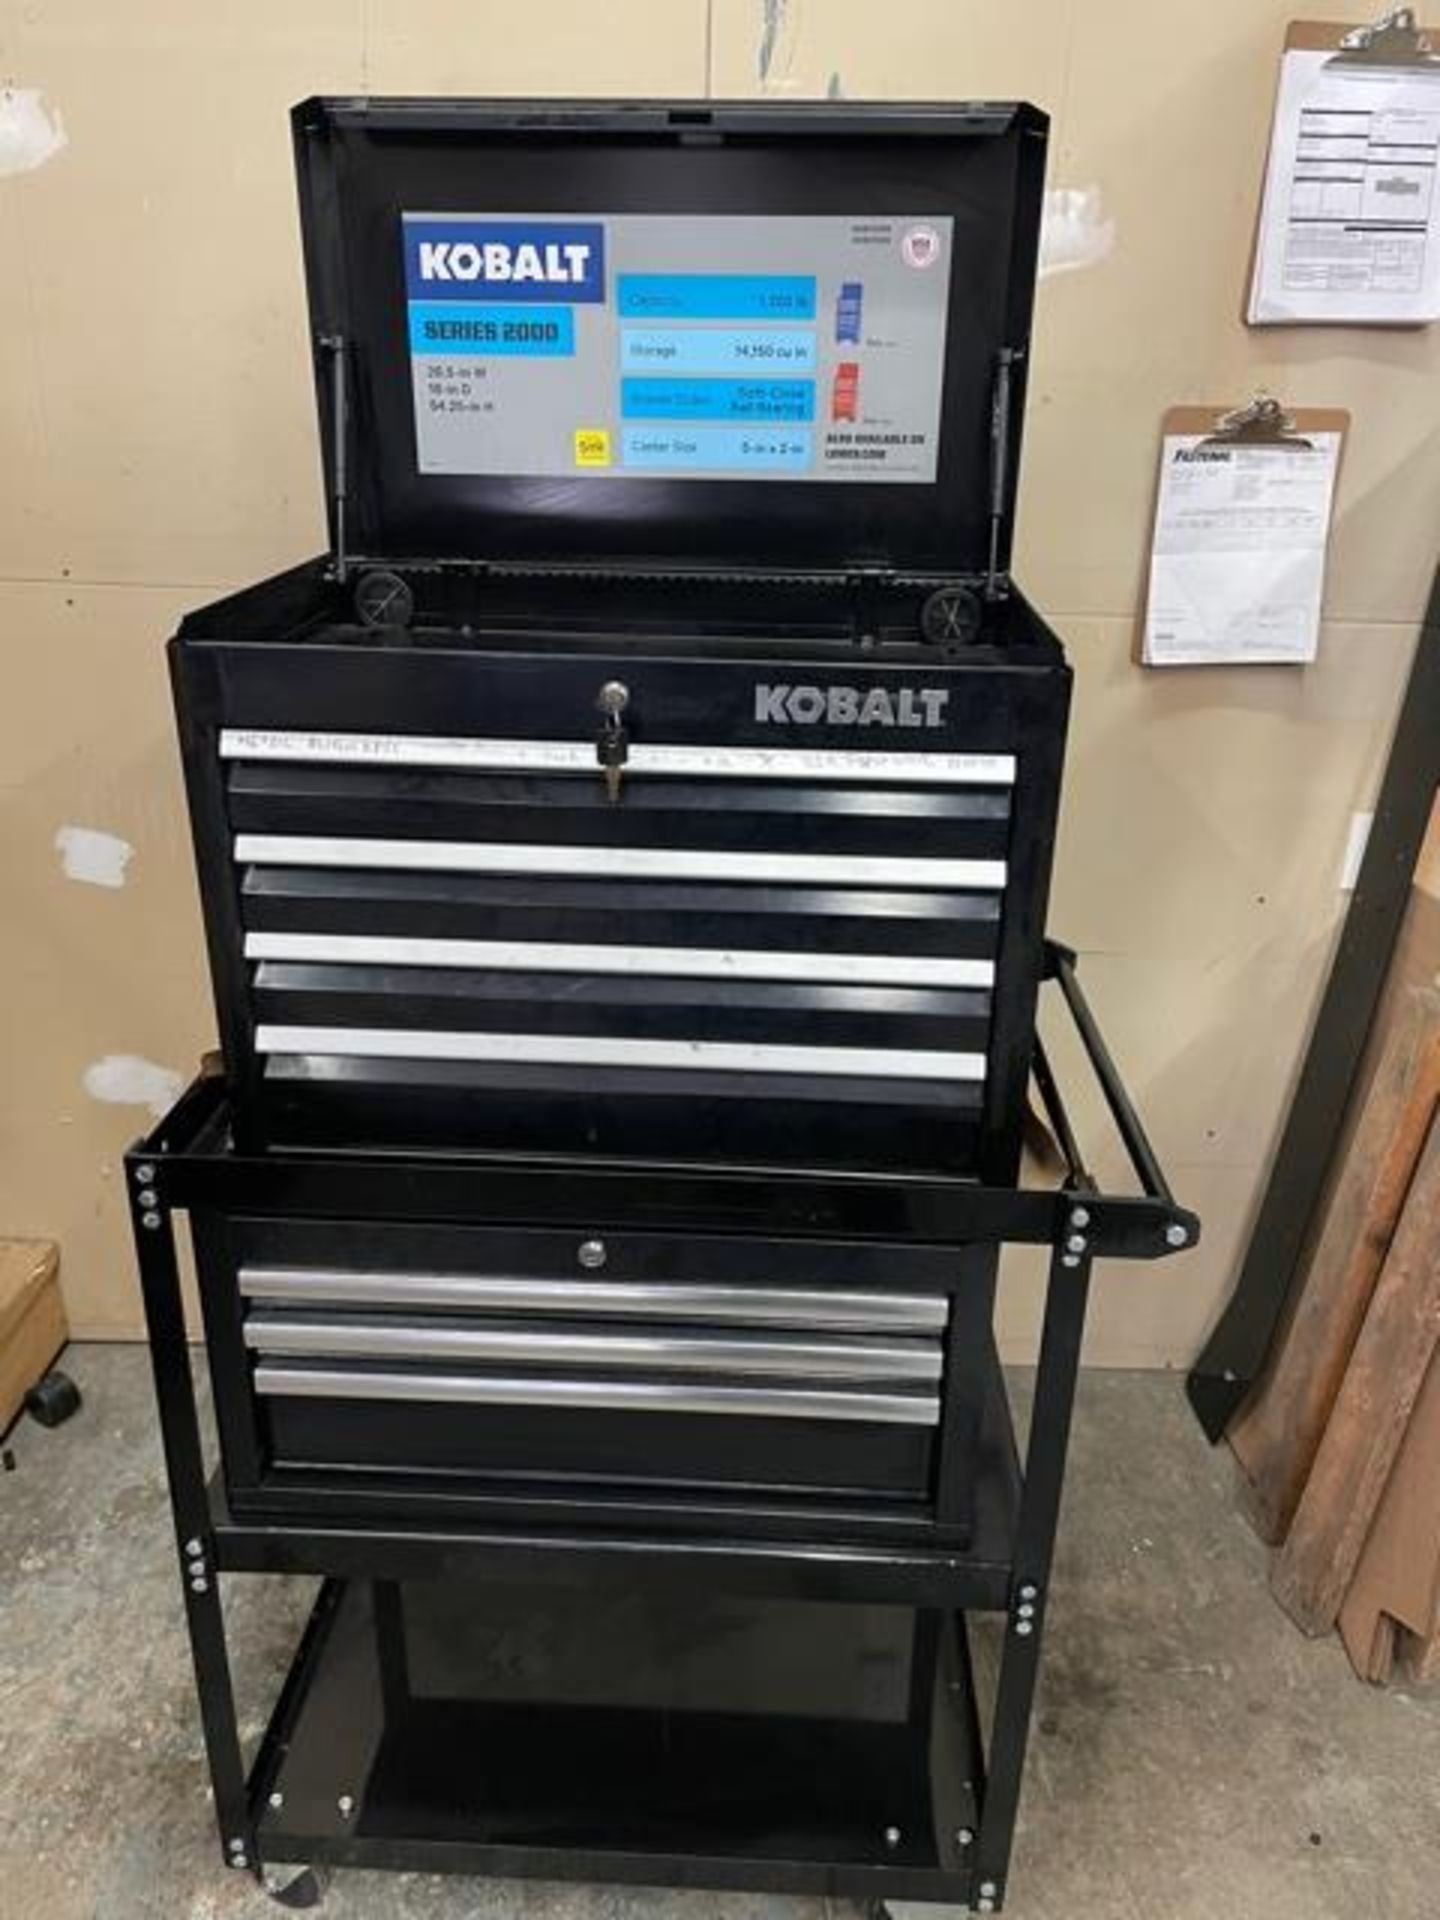 Mobile Tool box with Kobalt tool chest on the Top, 1200 lbs capacity, Mint condition